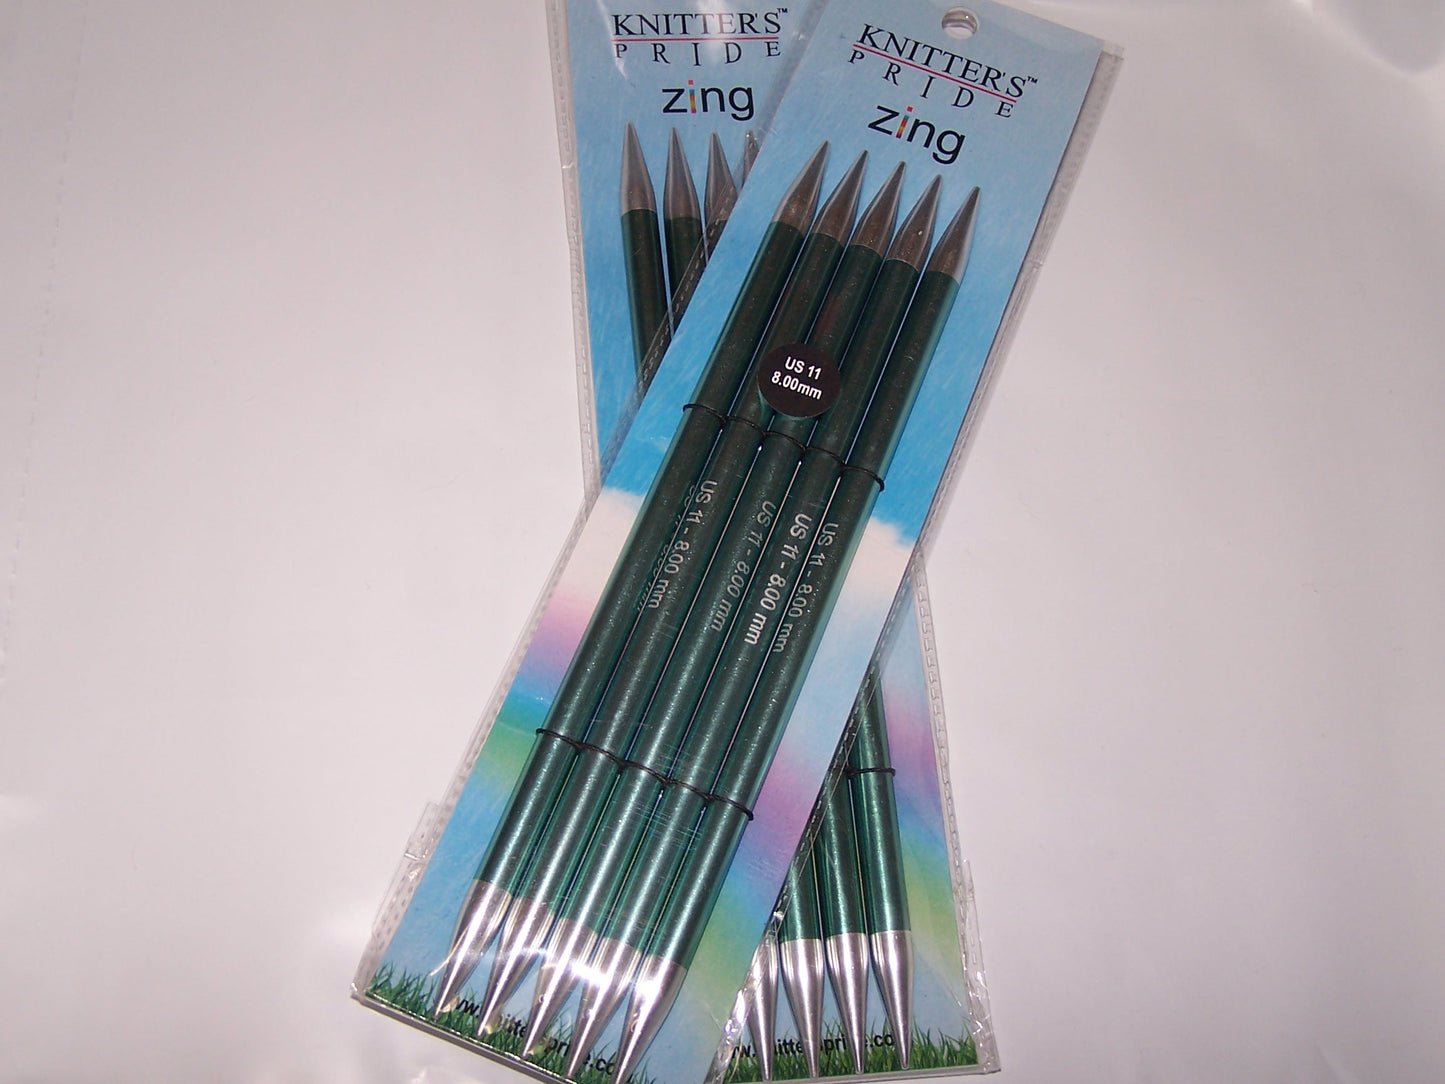 Knitters Pride Zing US 11 (6.00mm) size 8 inch DPN's